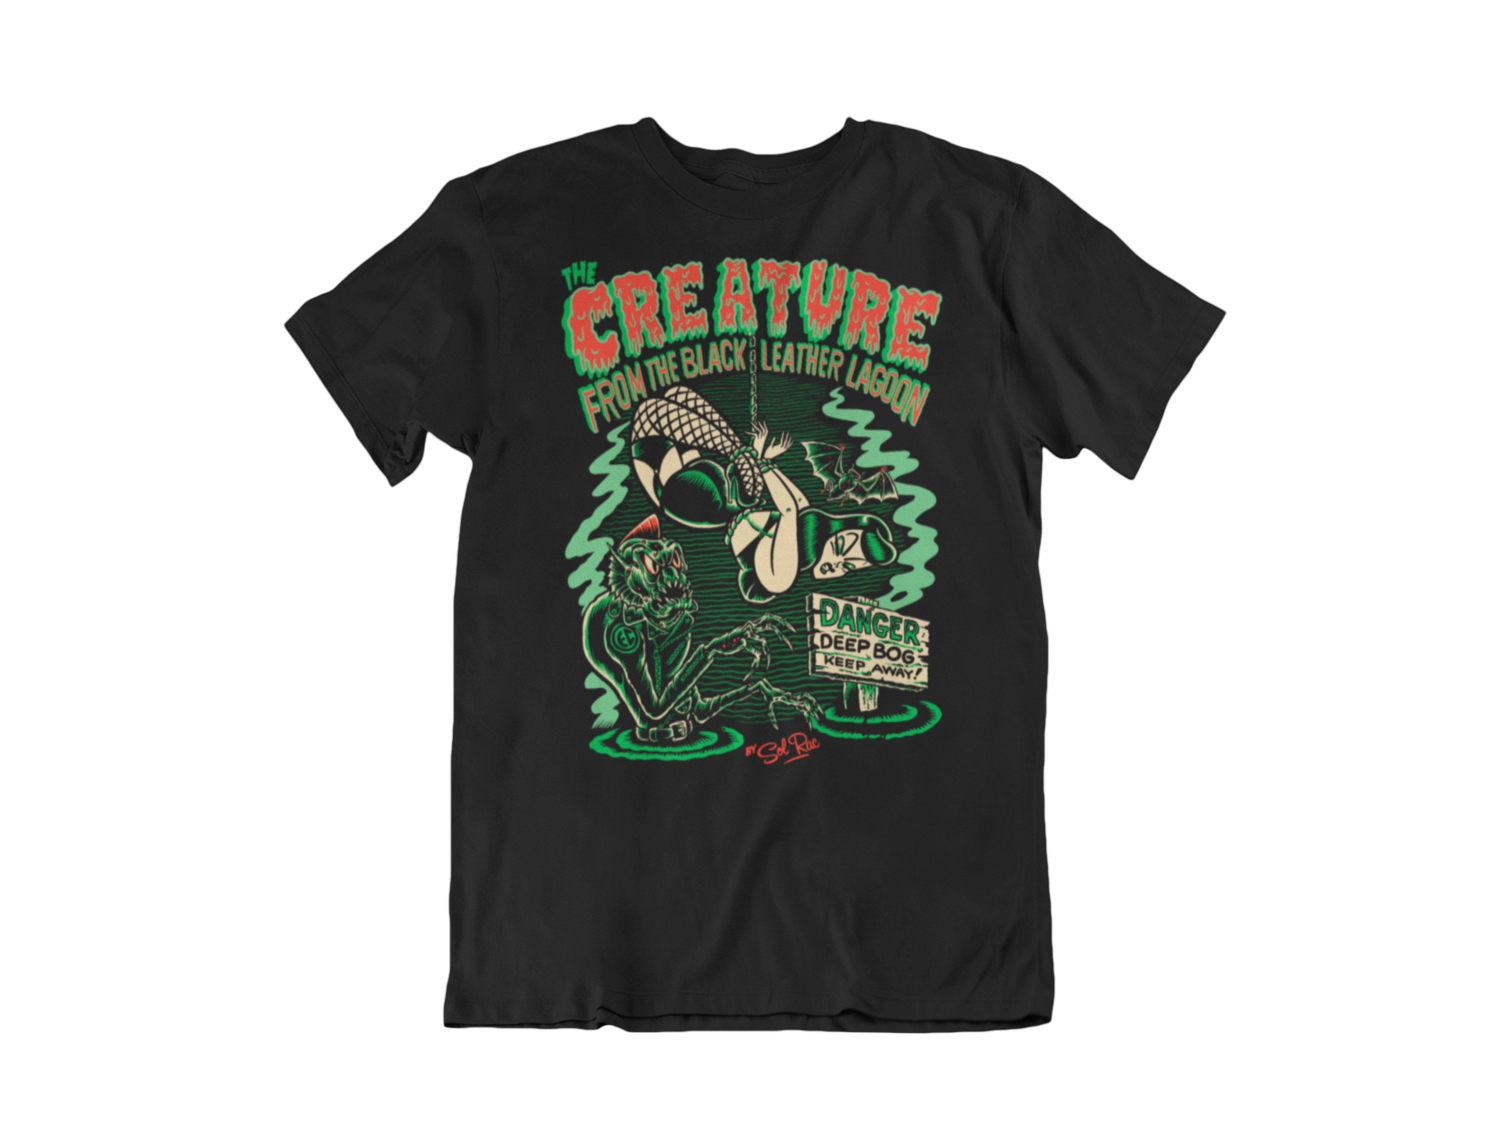 CREATURE FROM BLACK LEATHER T-SHIRT MAN BY SOL RAC